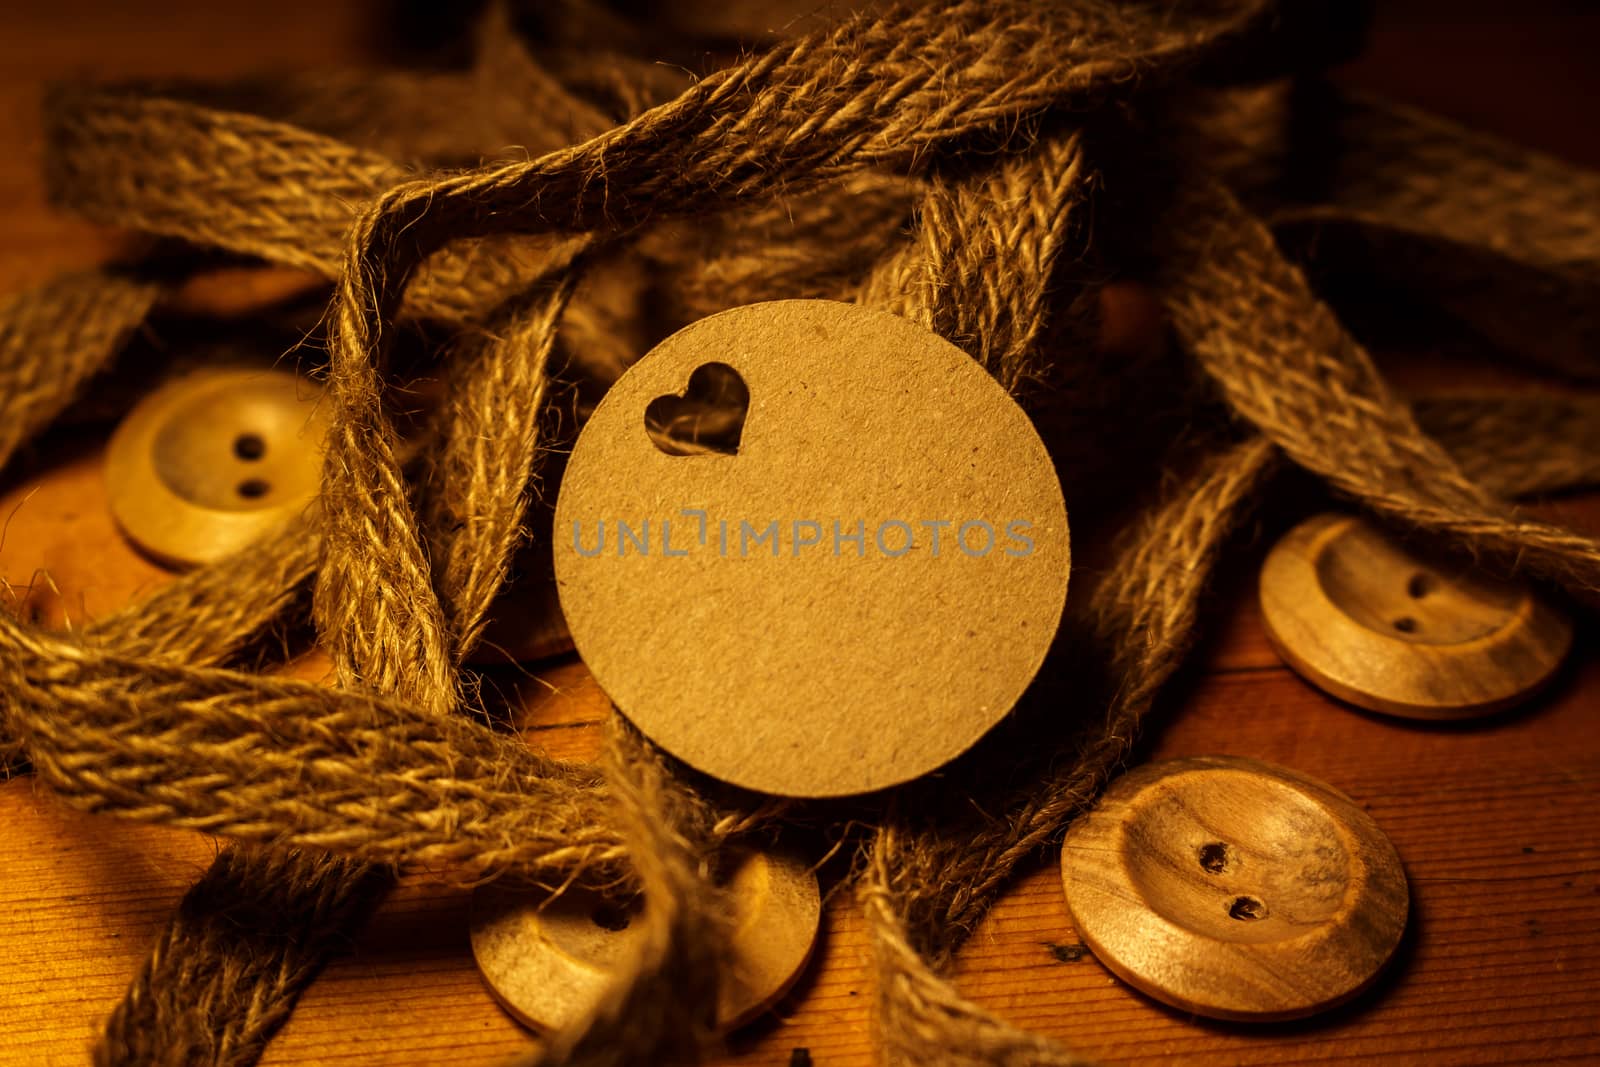 Round Circle Valentines day gift card tag on wooden background with vintage rustic twine and old buttons